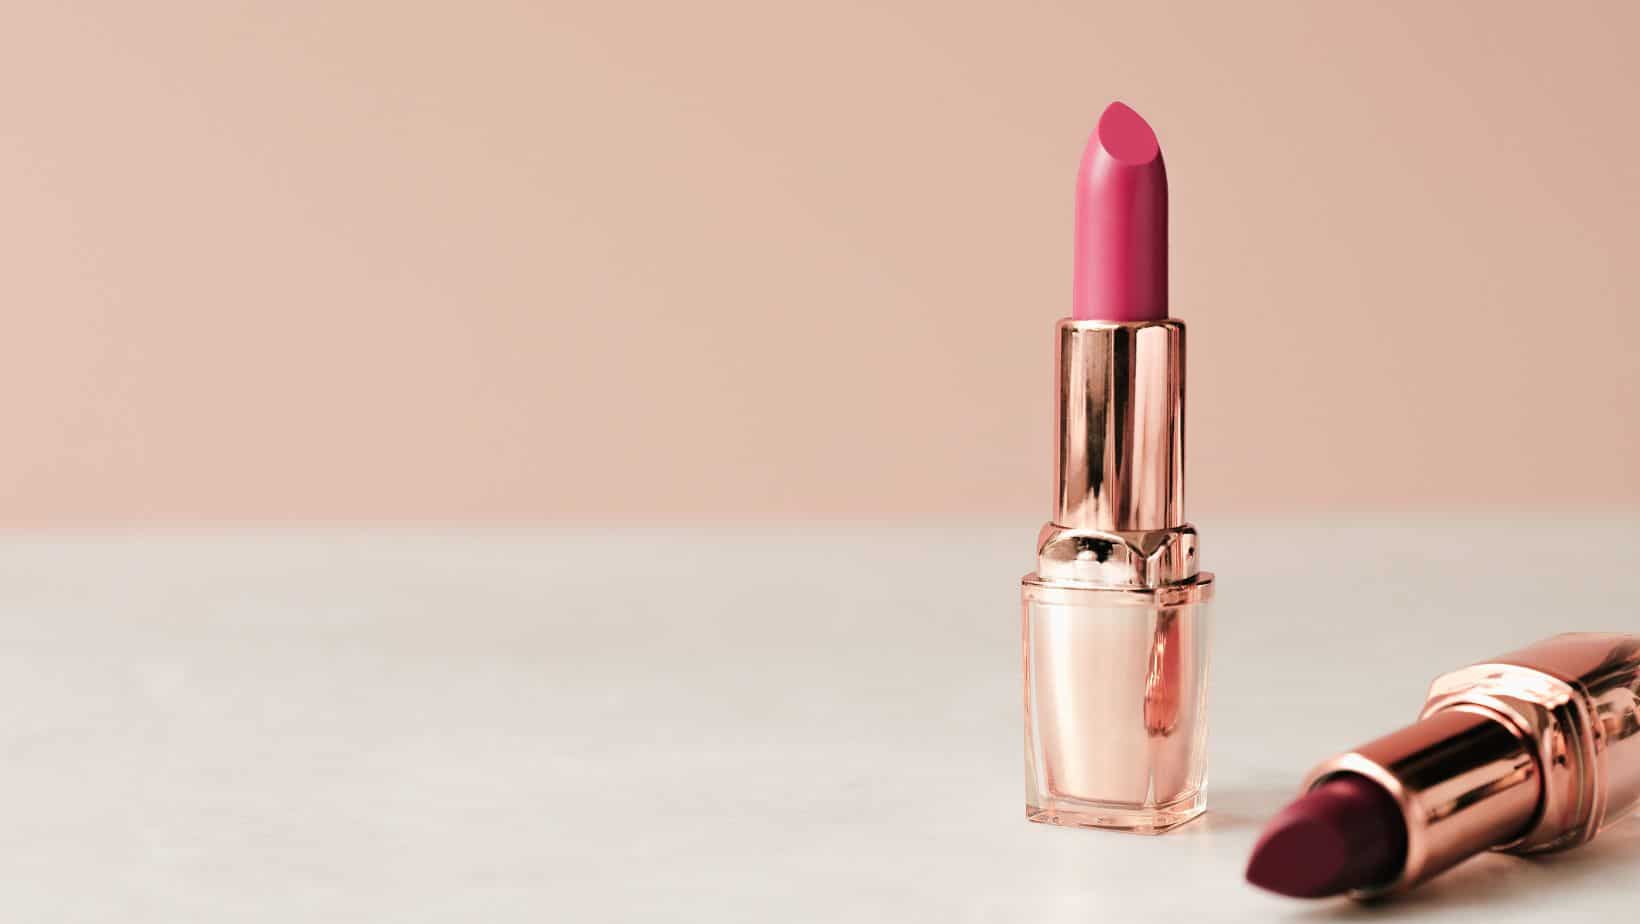 The 15+ Different Types of Lipstick for a Perfect Pout